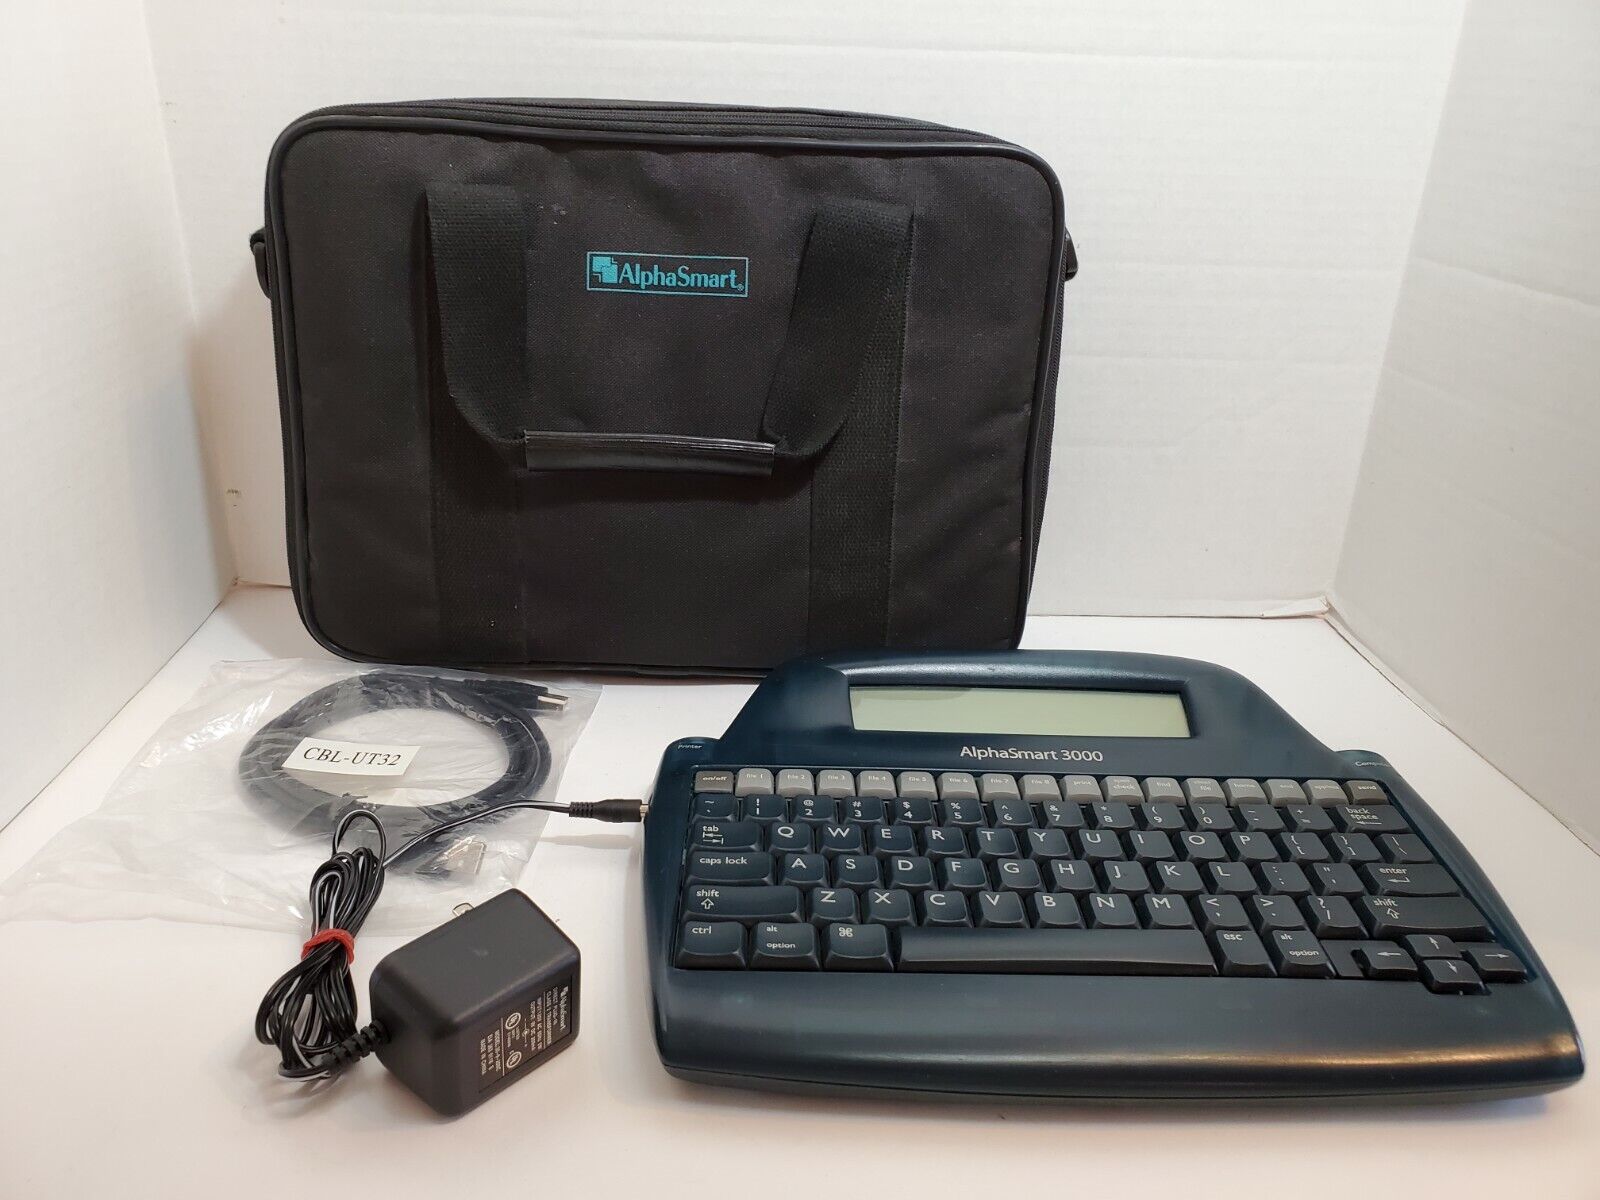 AlphaSmart 3000 - Portable Keyboard Word Processor w/ Cables, Adapter, Bag Case